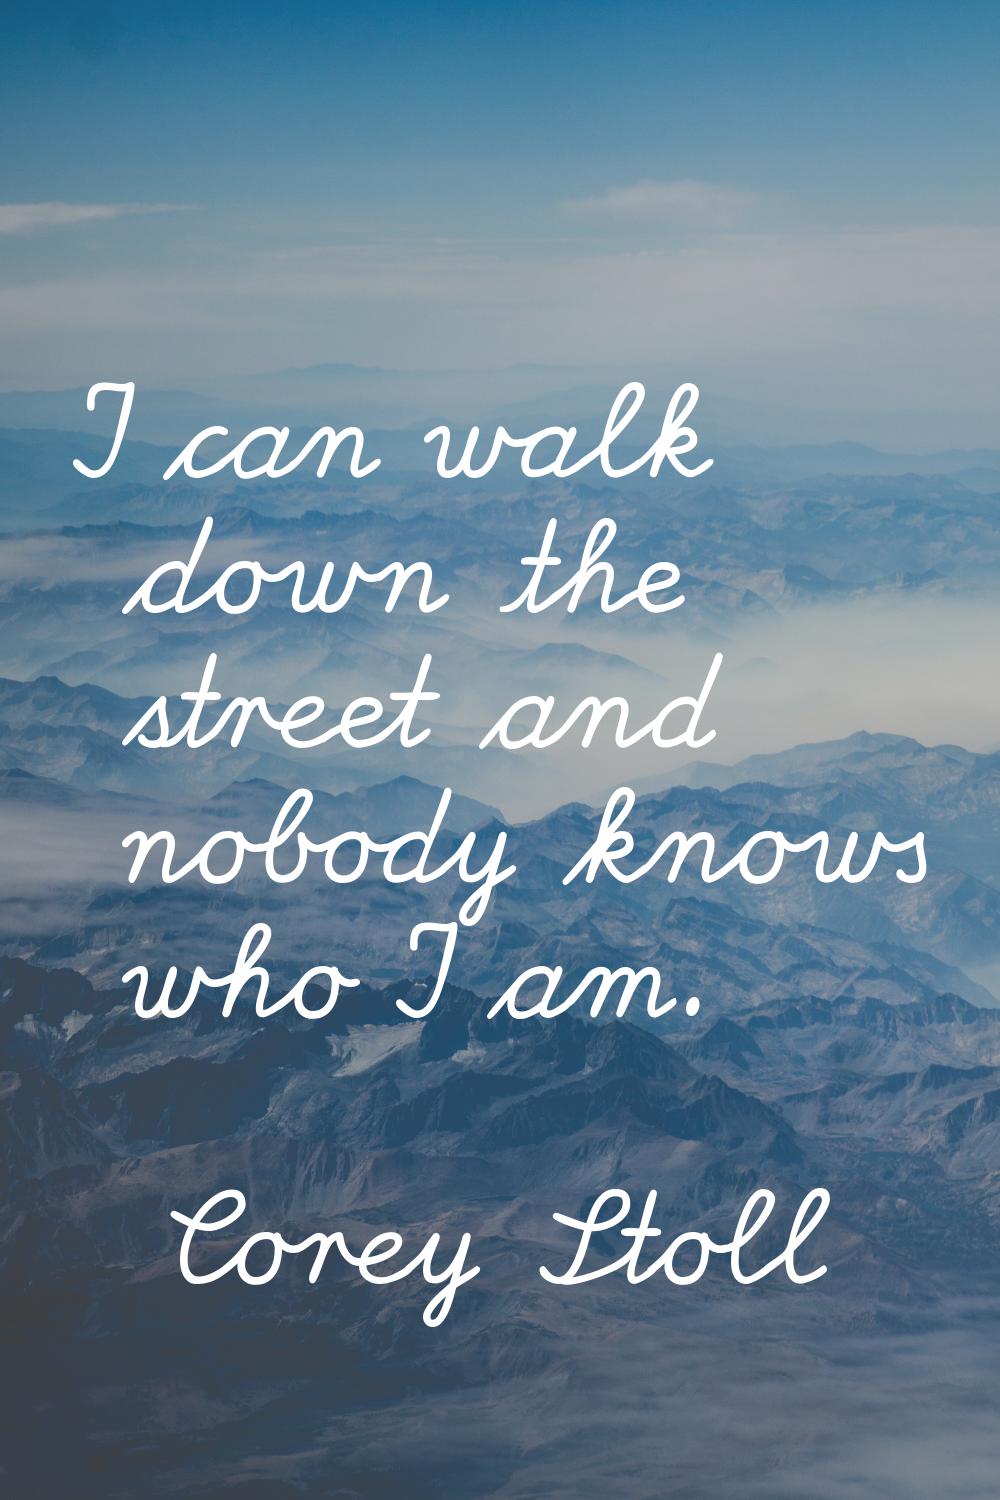 I can walk down the street and nobody knows who I am.